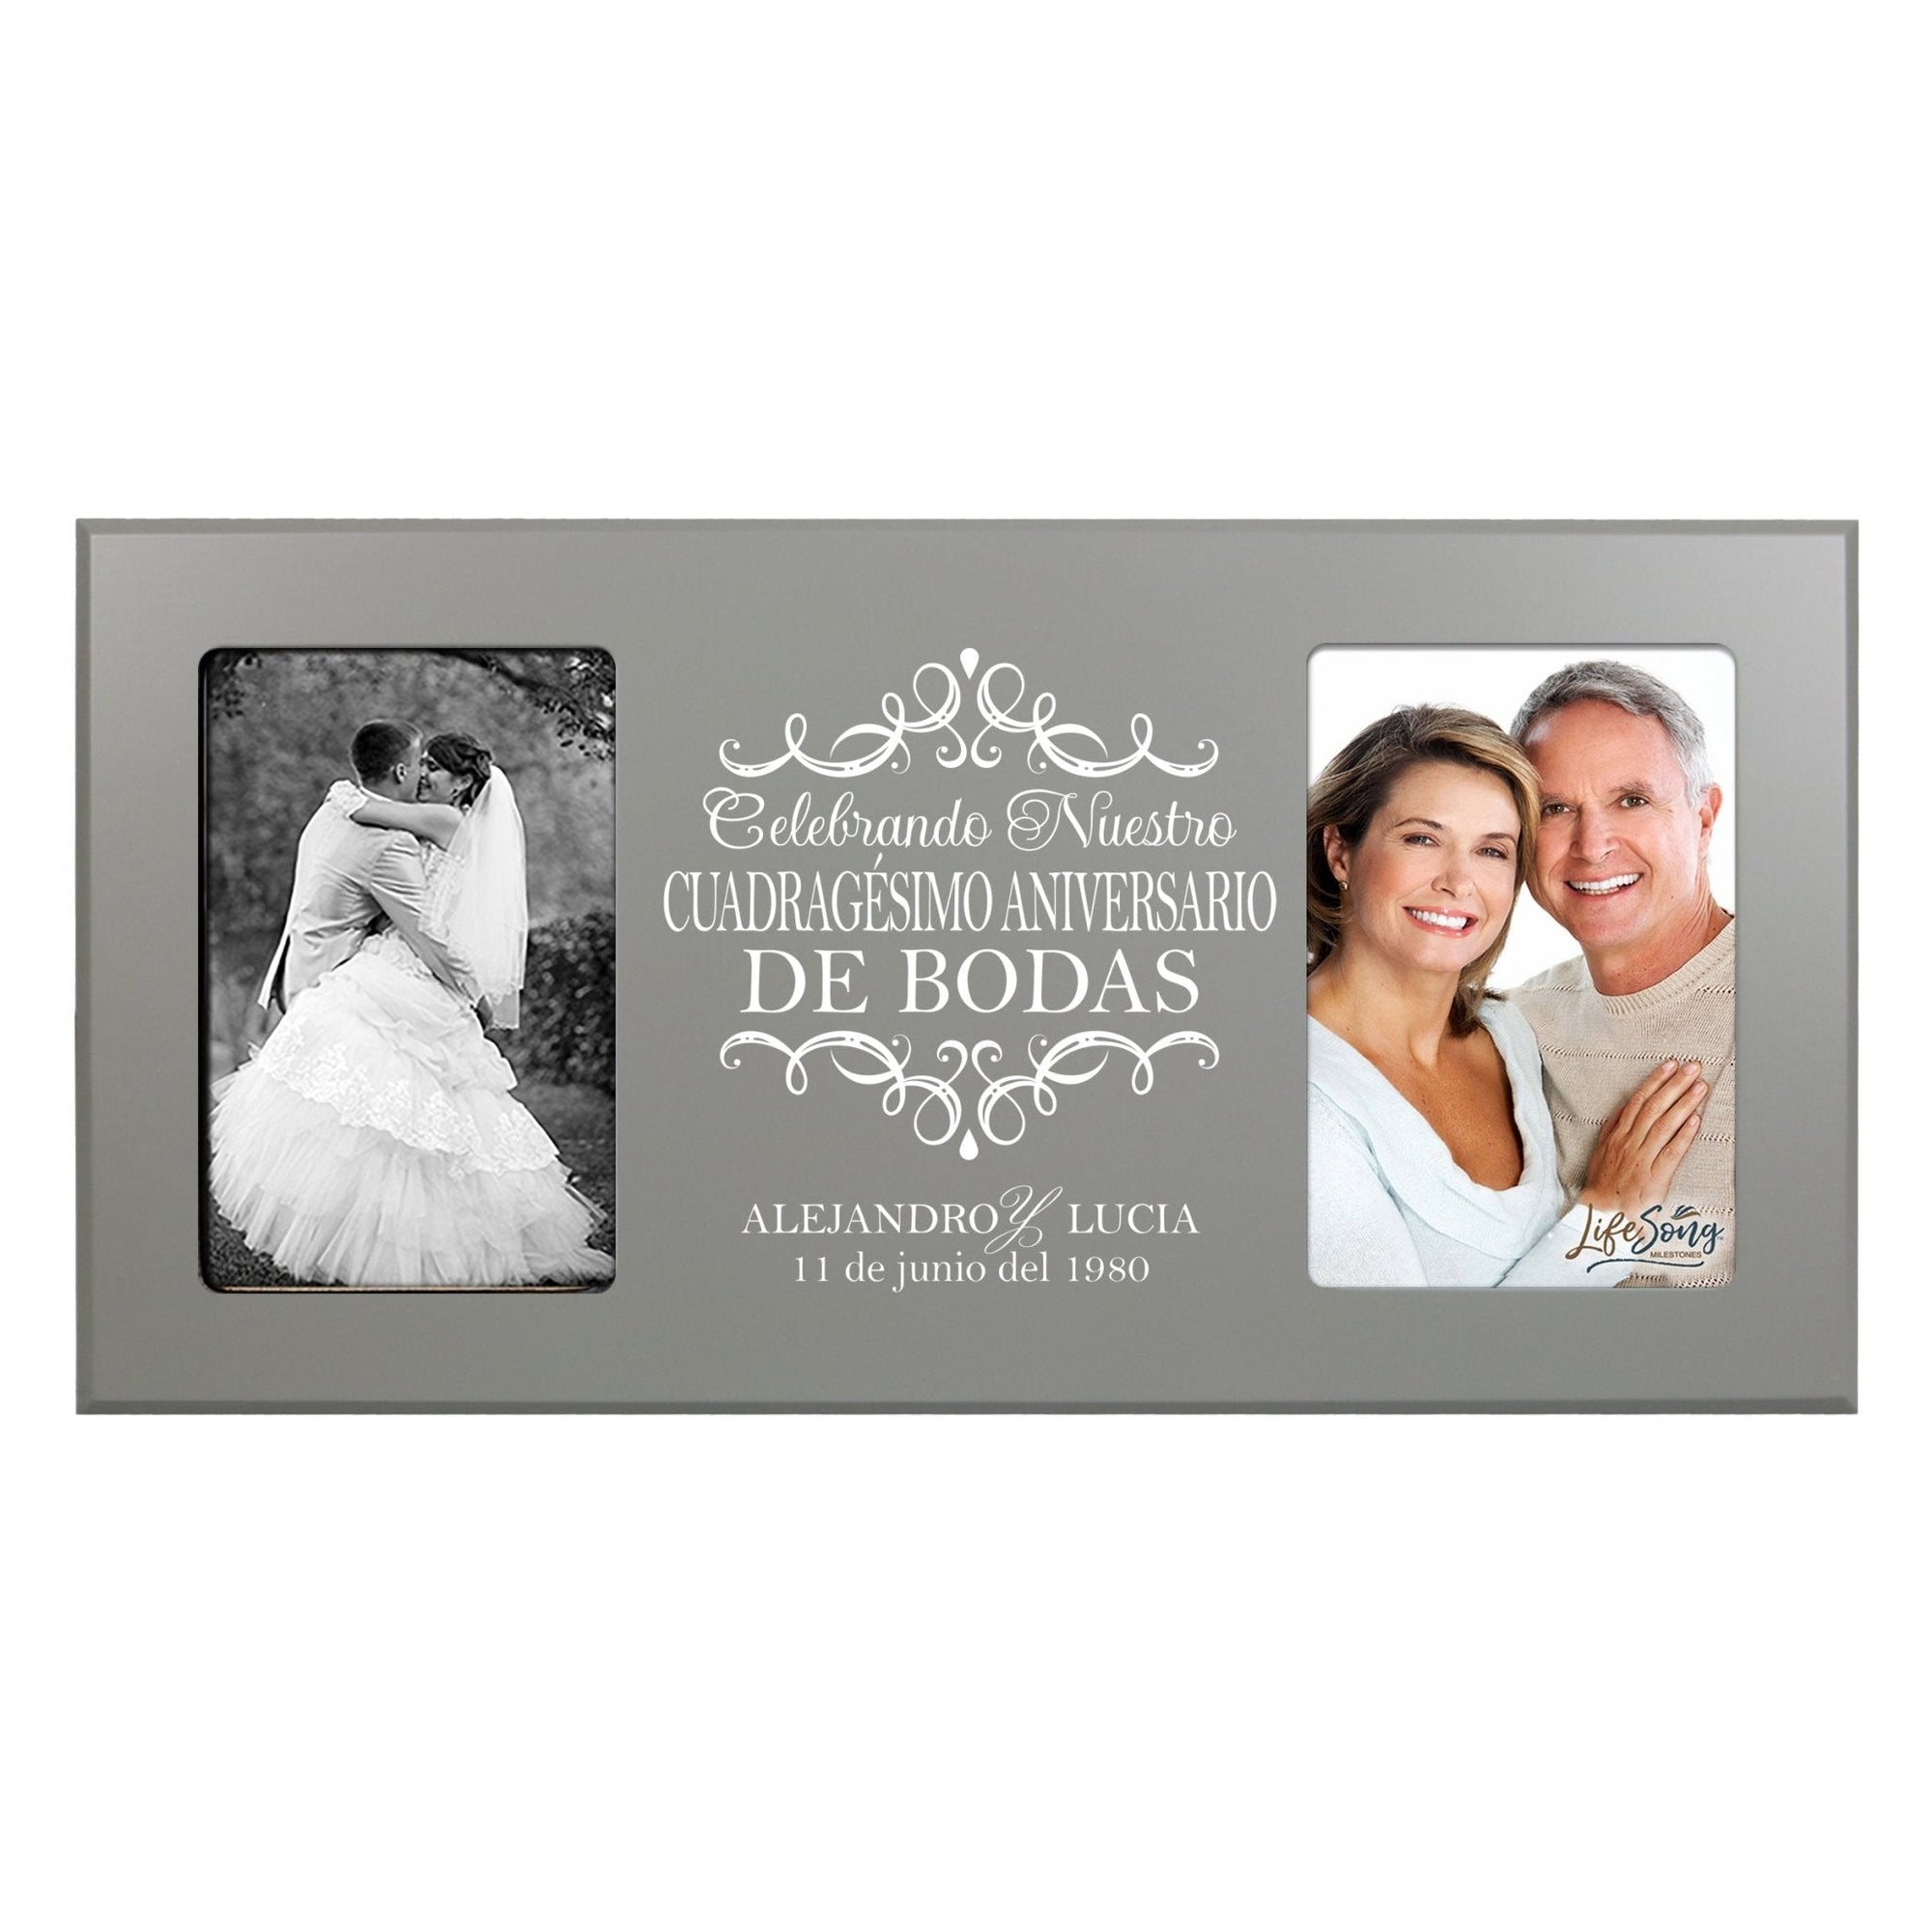 Unique Spanish Picture Frame 40th Wedding Anniversary Home Decor – Personalized 40 year Gift for Couples